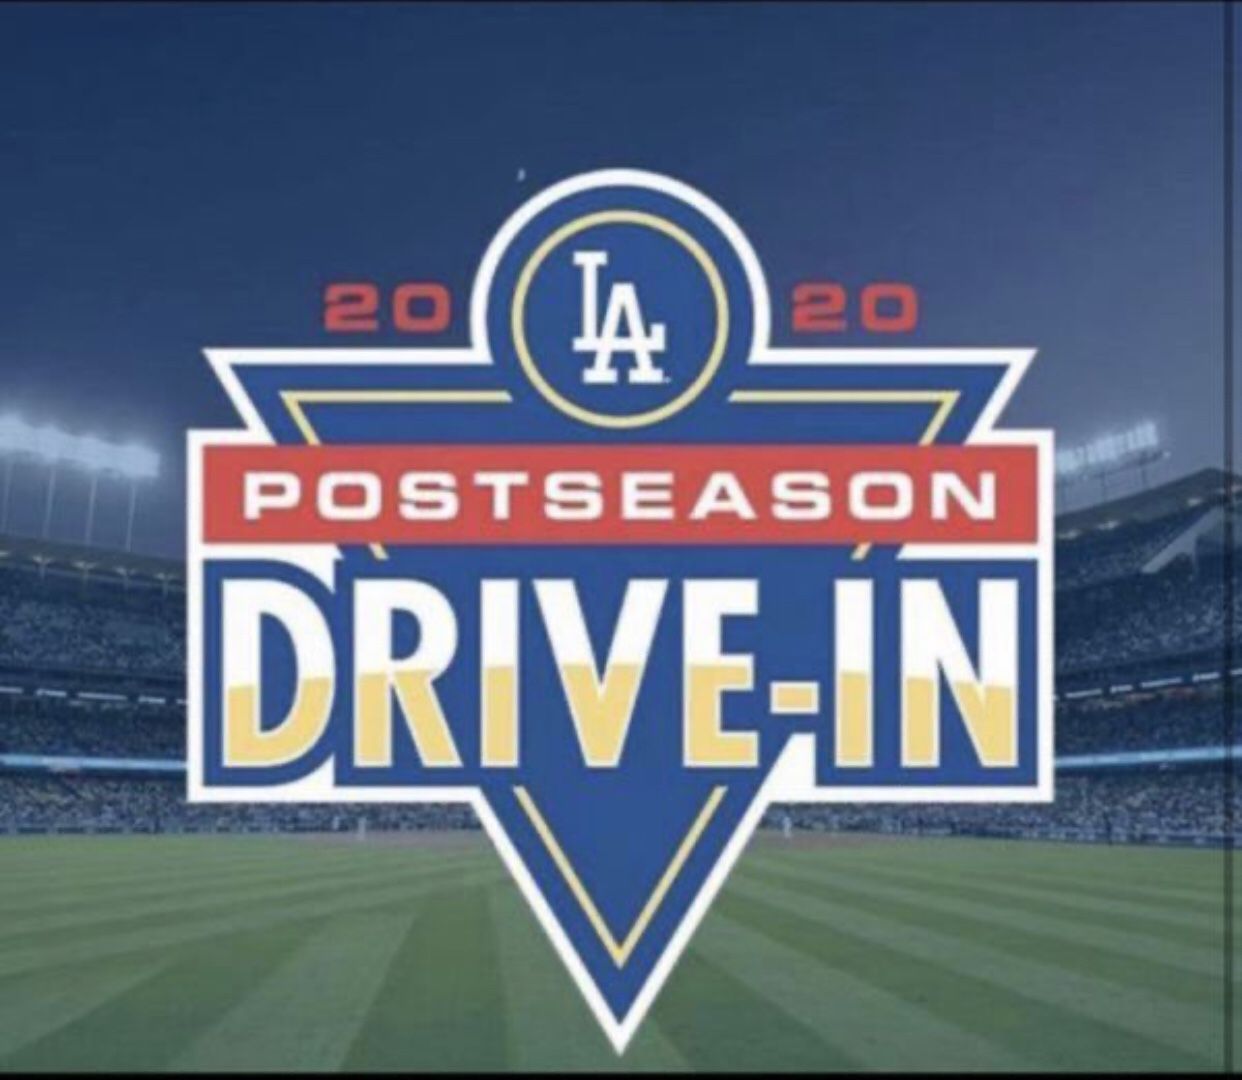 World Series viewing party Game 6 Dodgers in 6 sold out